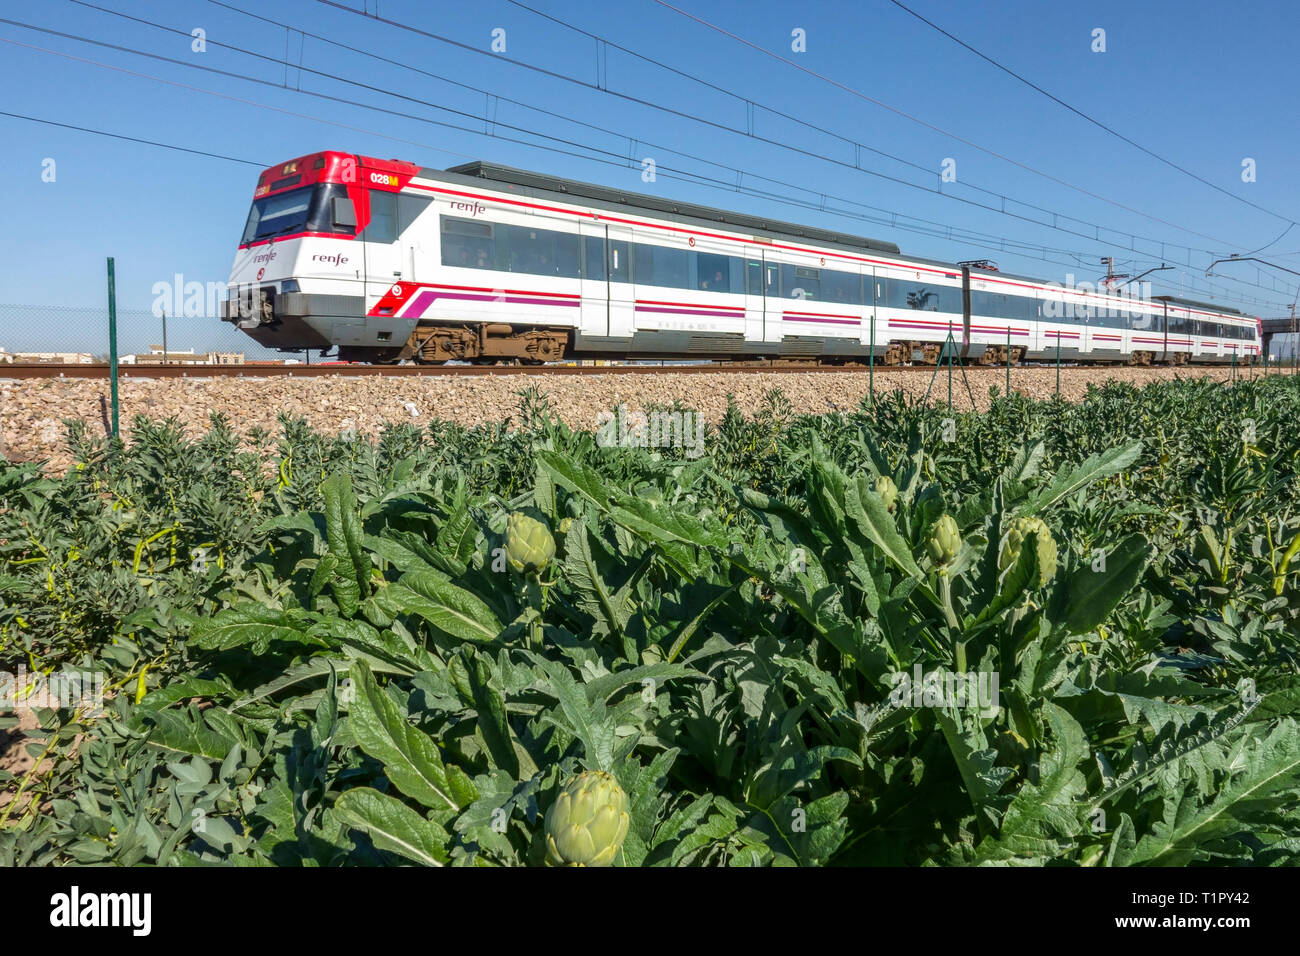 Cercanias - passenger train passing through an agricultural countryside with artichokes Spain agriculture field Valencia Spain train suburban commuter Stock Photo